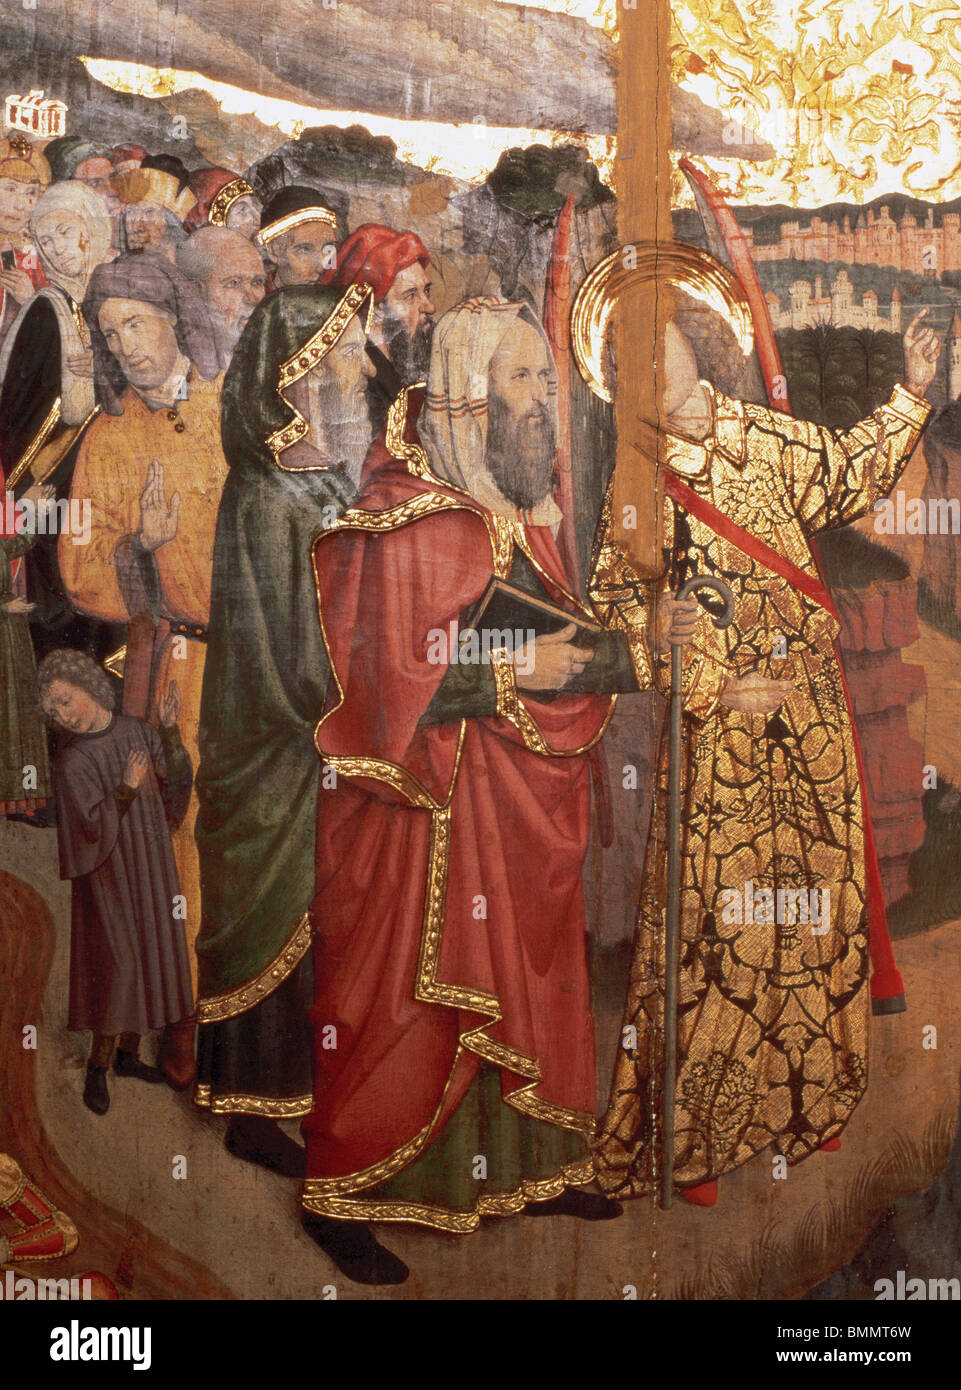 15th century Spanish Jews. Detail of the altarpiece of St. Bernardino and the guardian angel by Jaume Huguet (1414-1492). Stock Photo